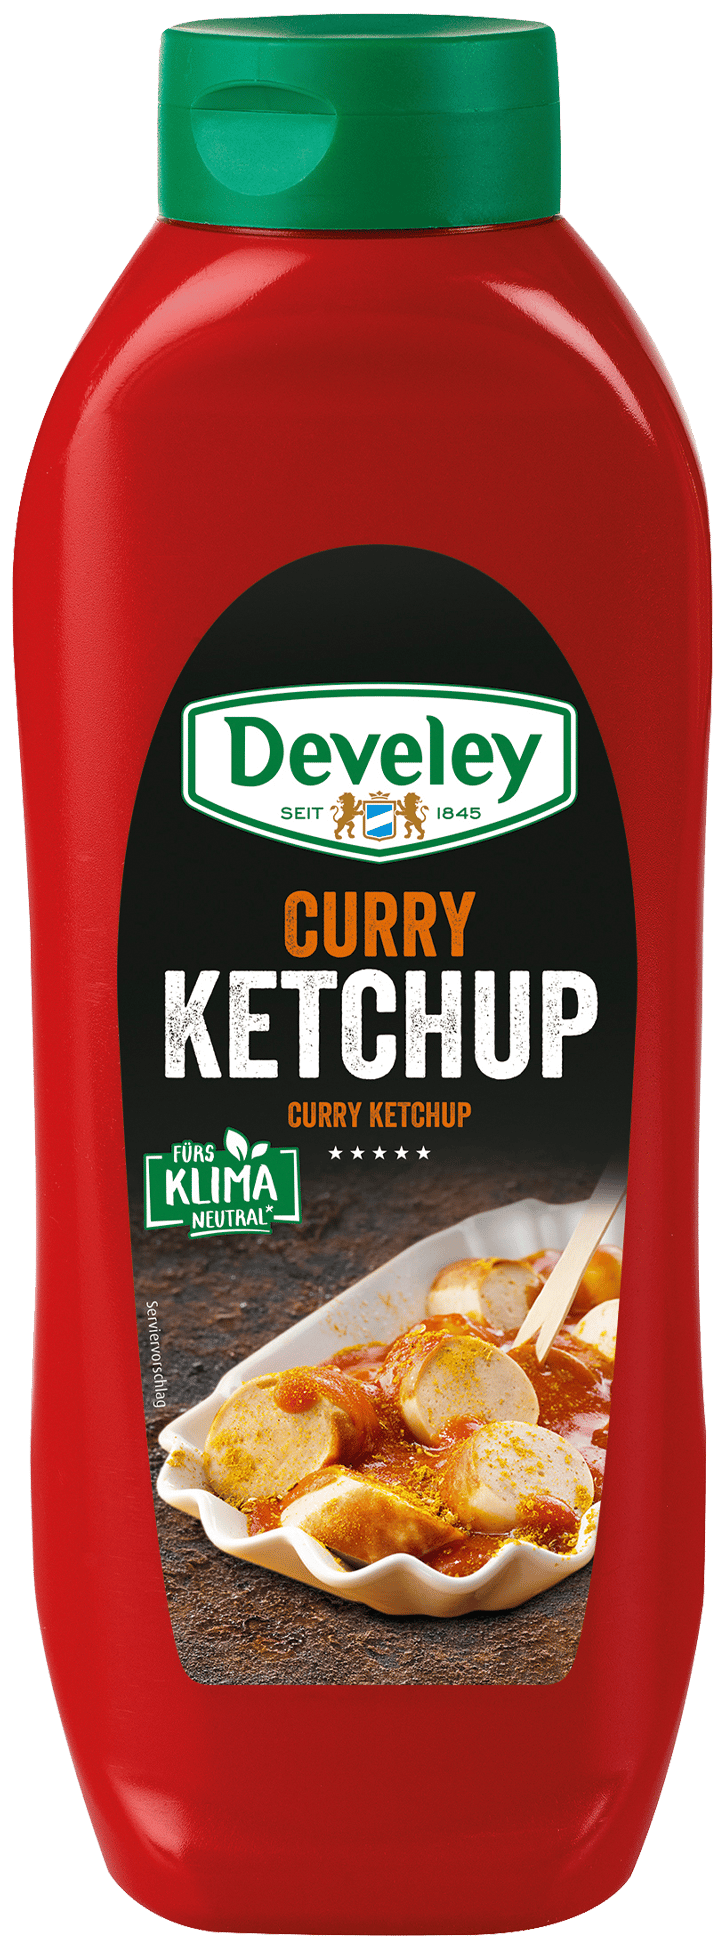 Develey Curry Ketchup 875 ml